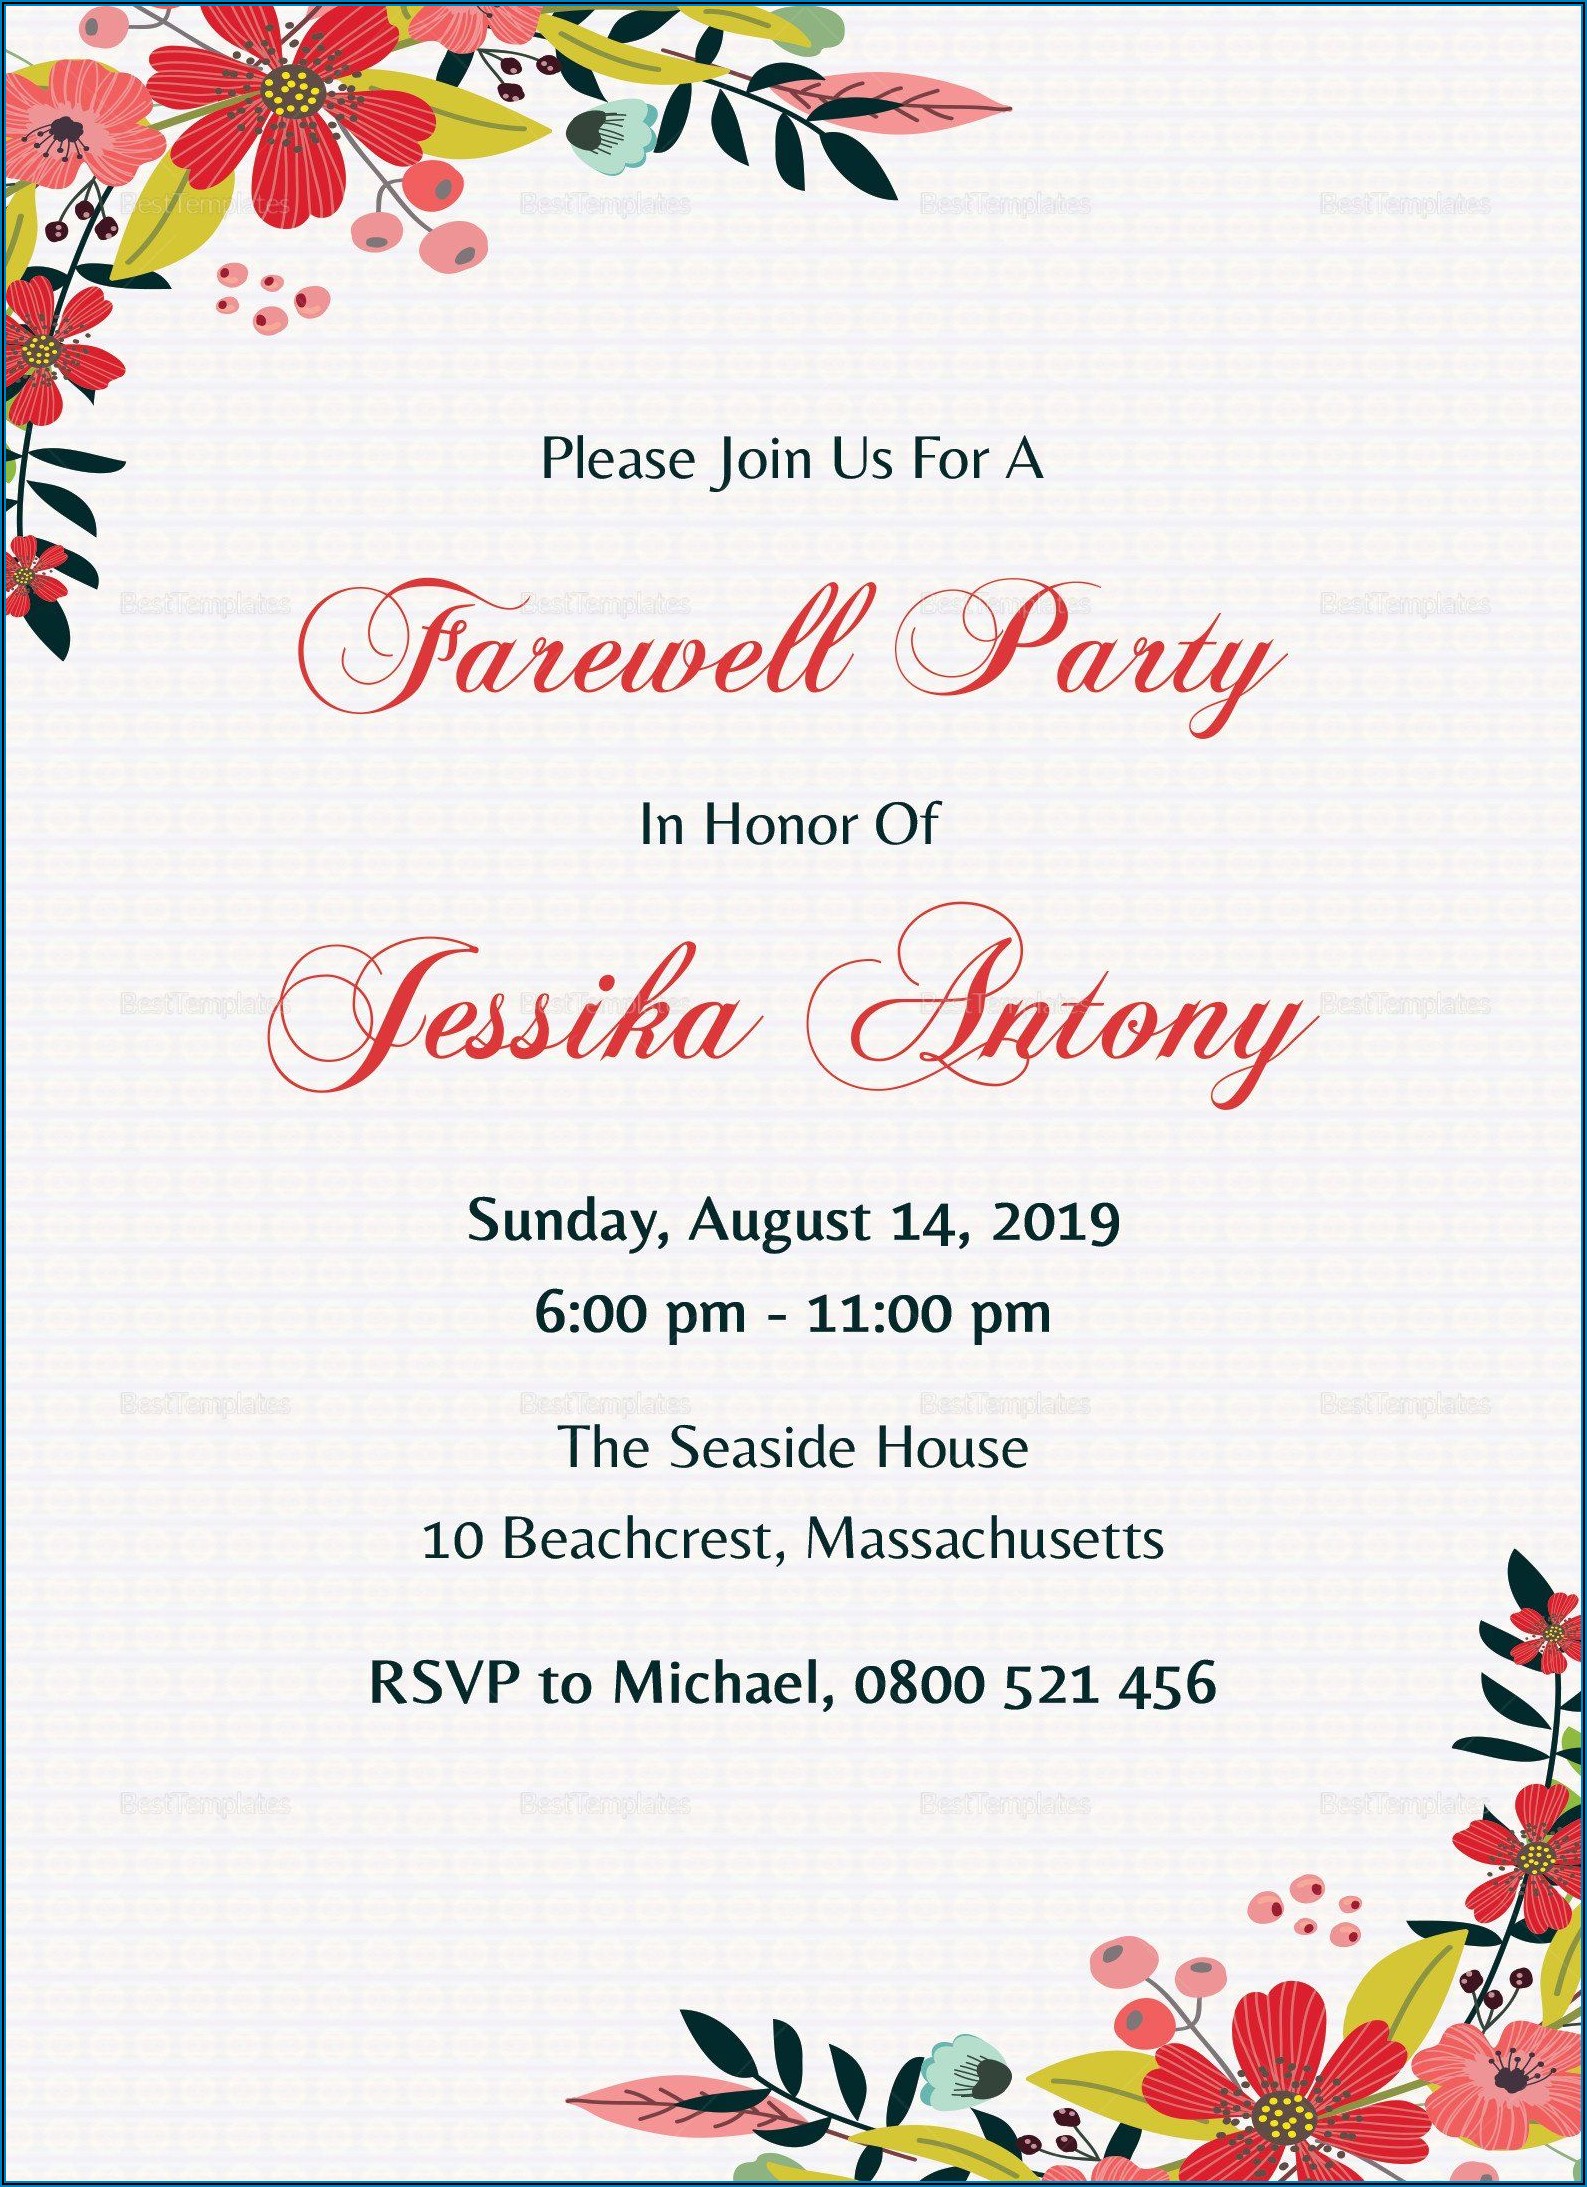 Goodbye Party Invitation Template Free